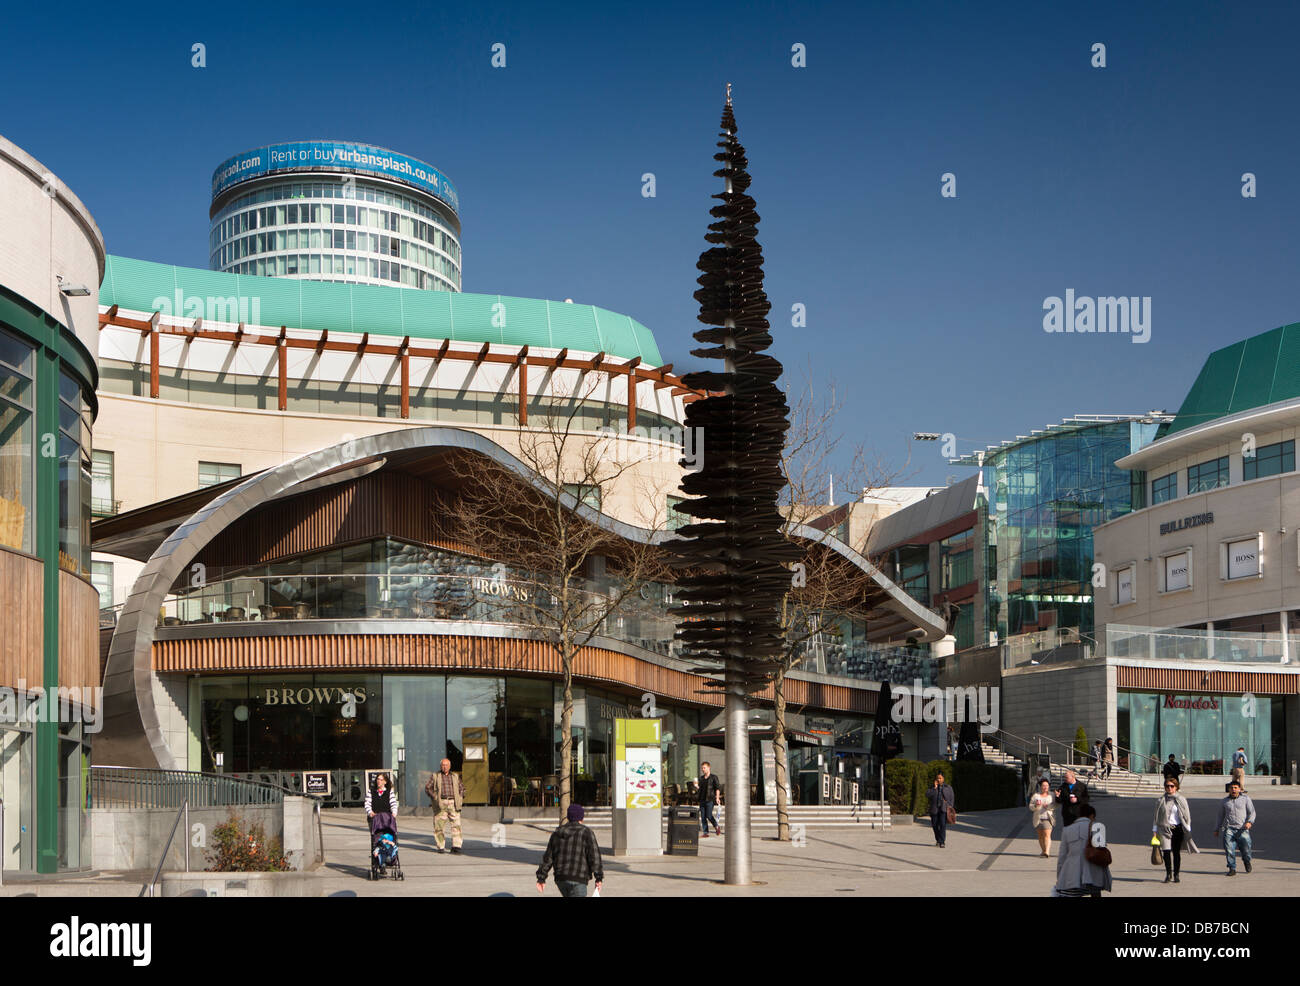 UK, England, Birmingham, Bullring, St Martin’s Square, with new spiral tree sculpture Stock Photo